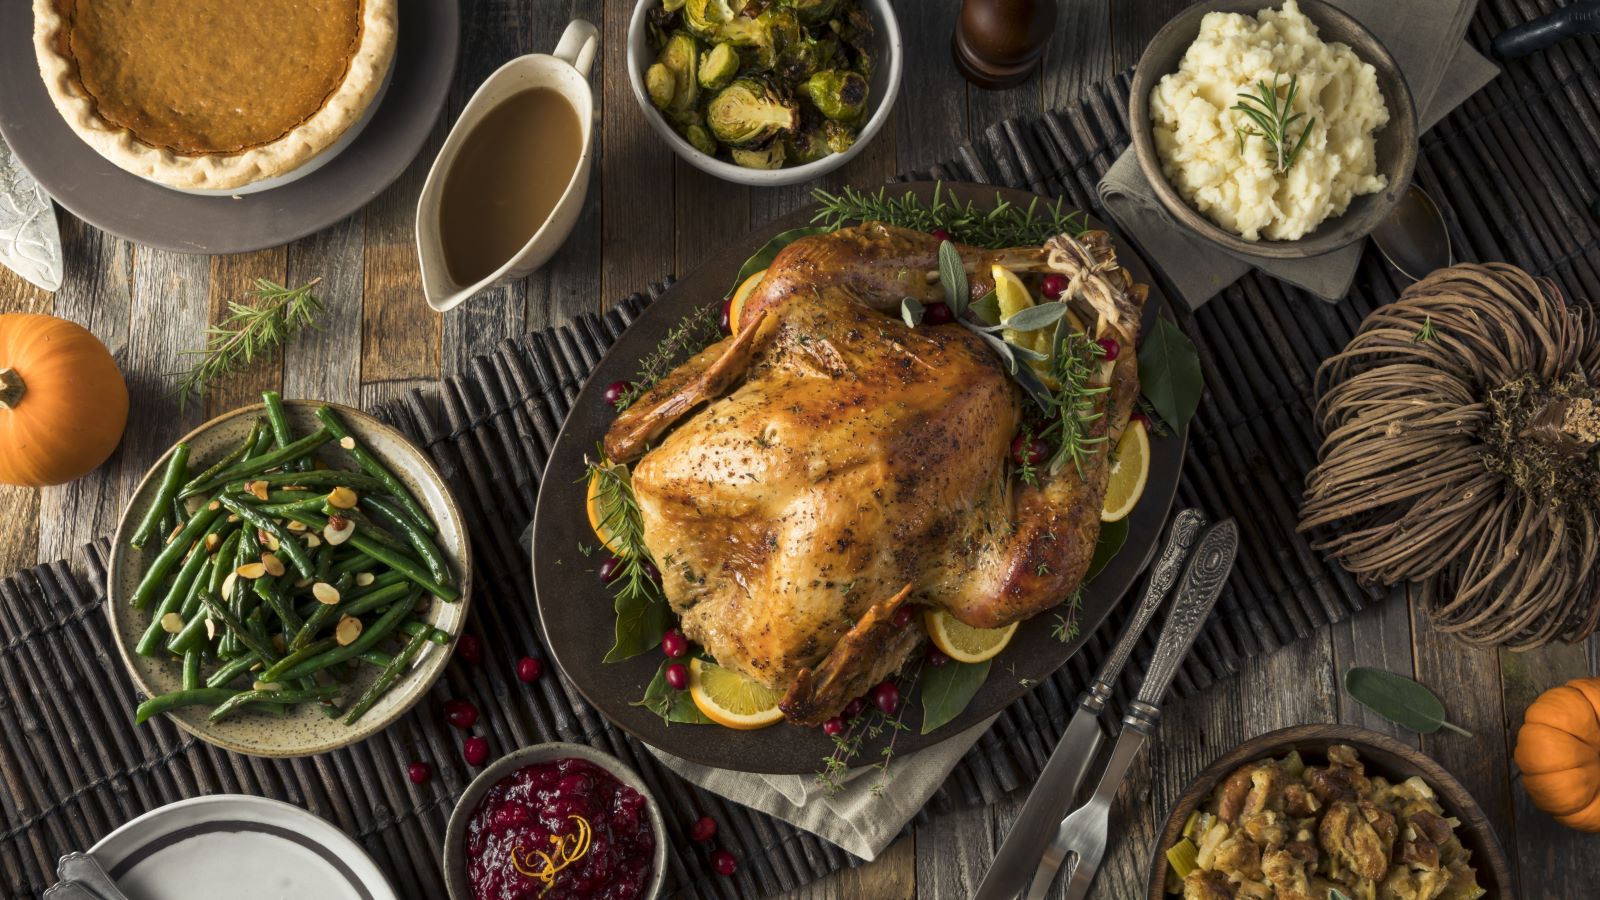 6 Healthy Foods to Add to Your Plate This Thanksgiving